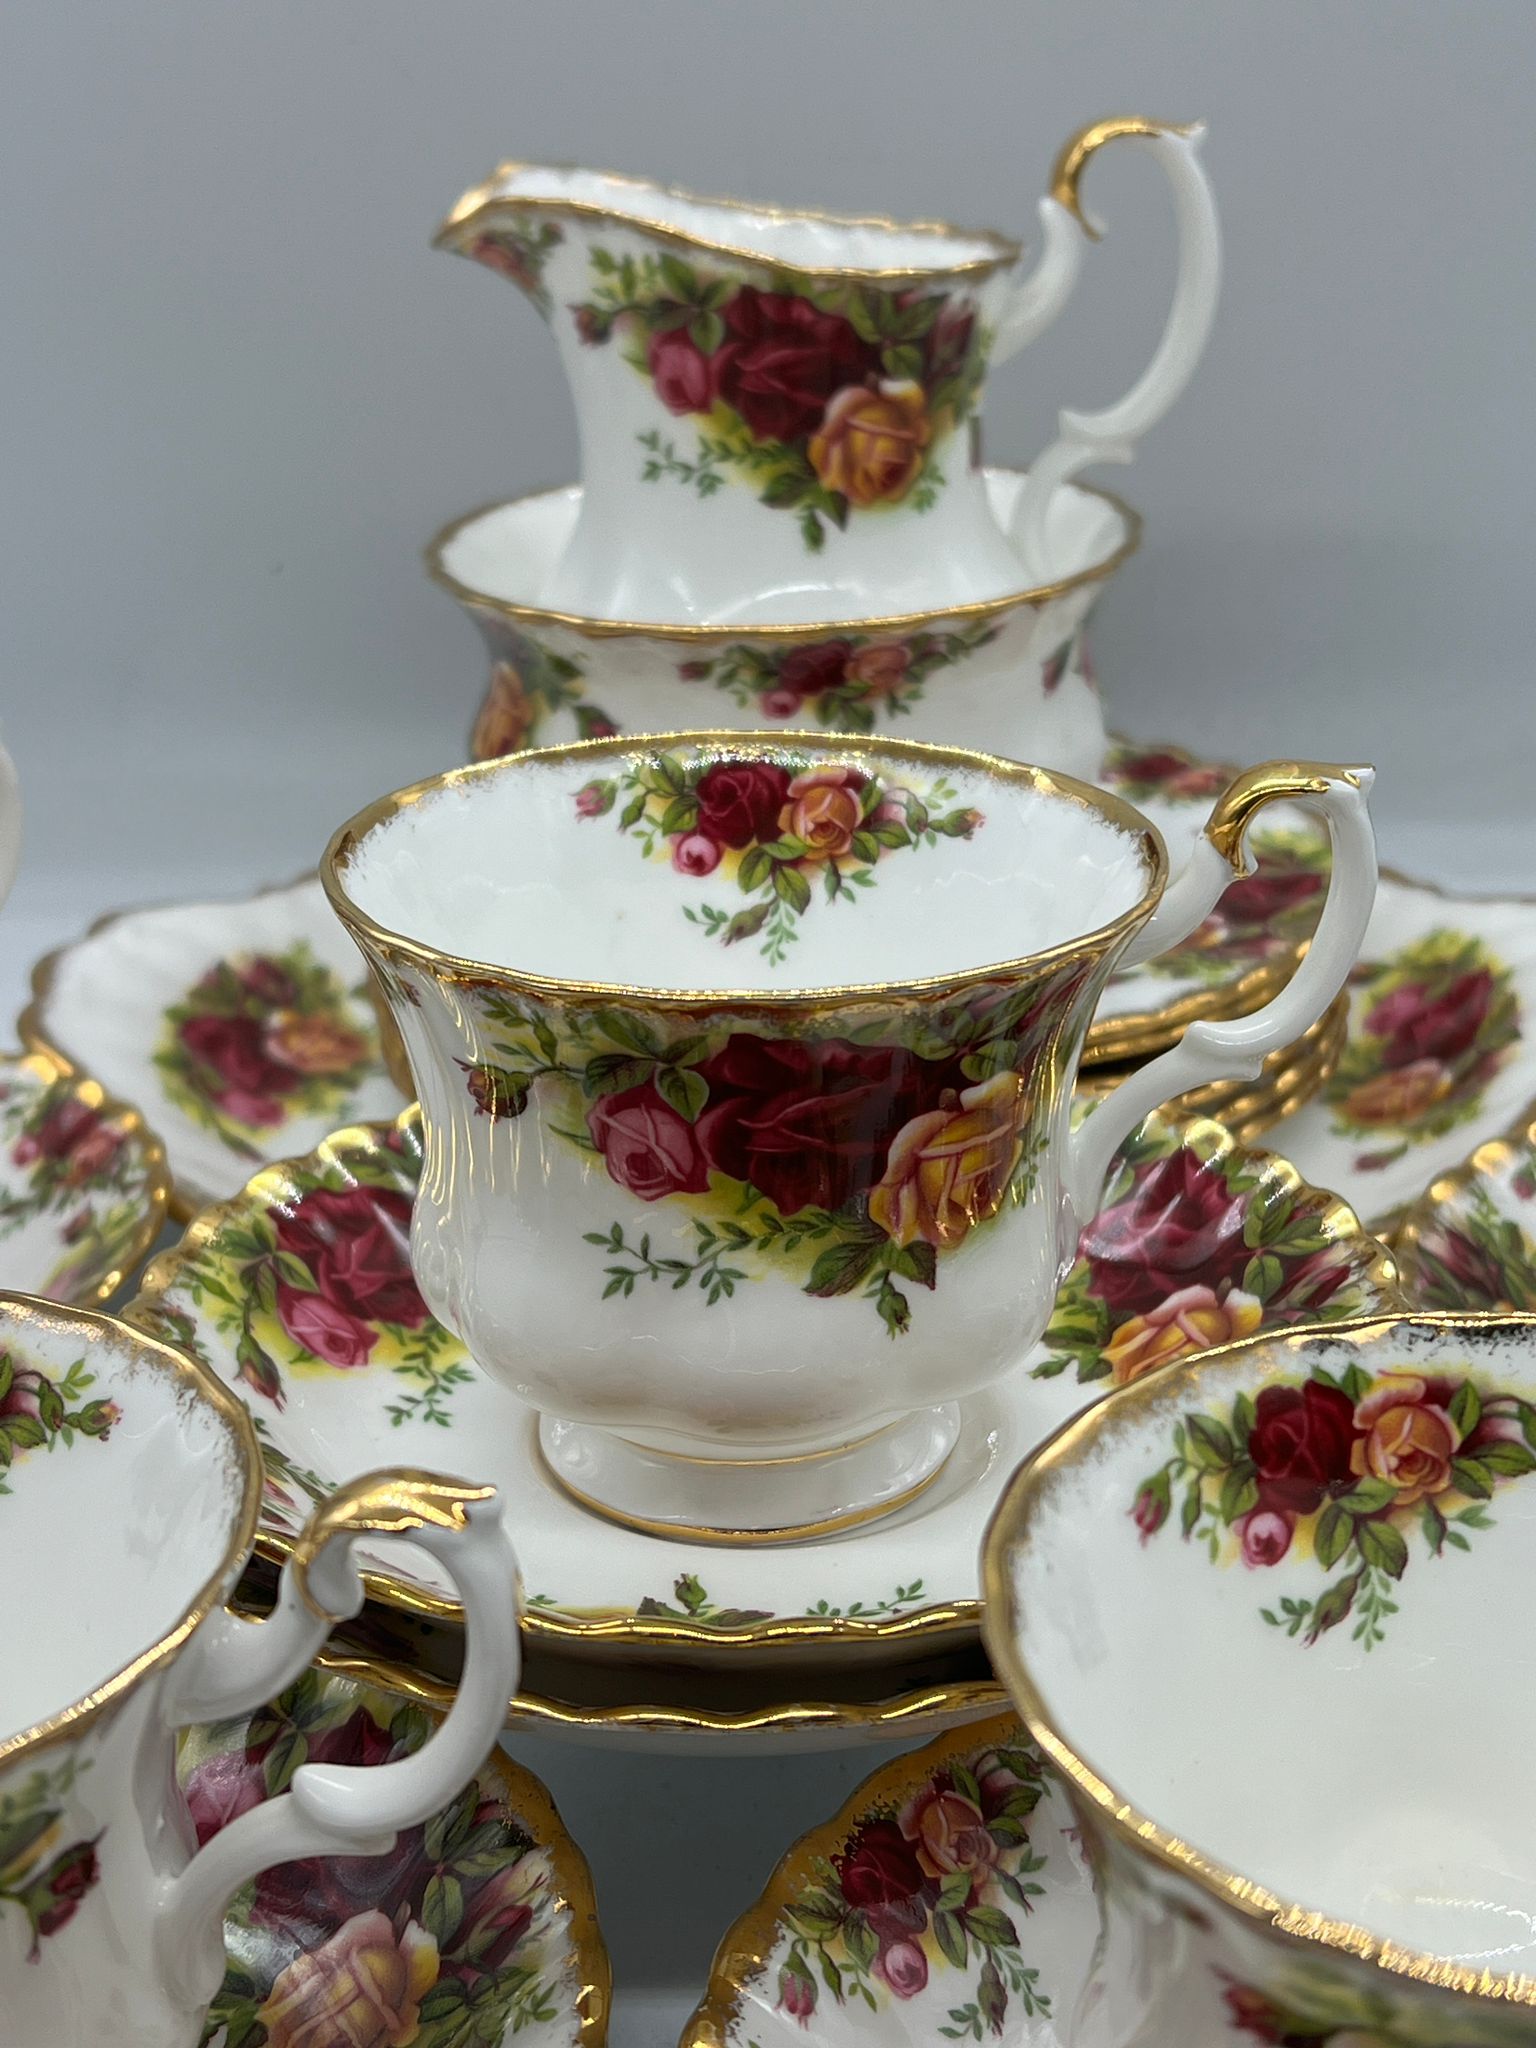 A part tea set "Old Country Roses" Royal Albert - Image 2 of 4